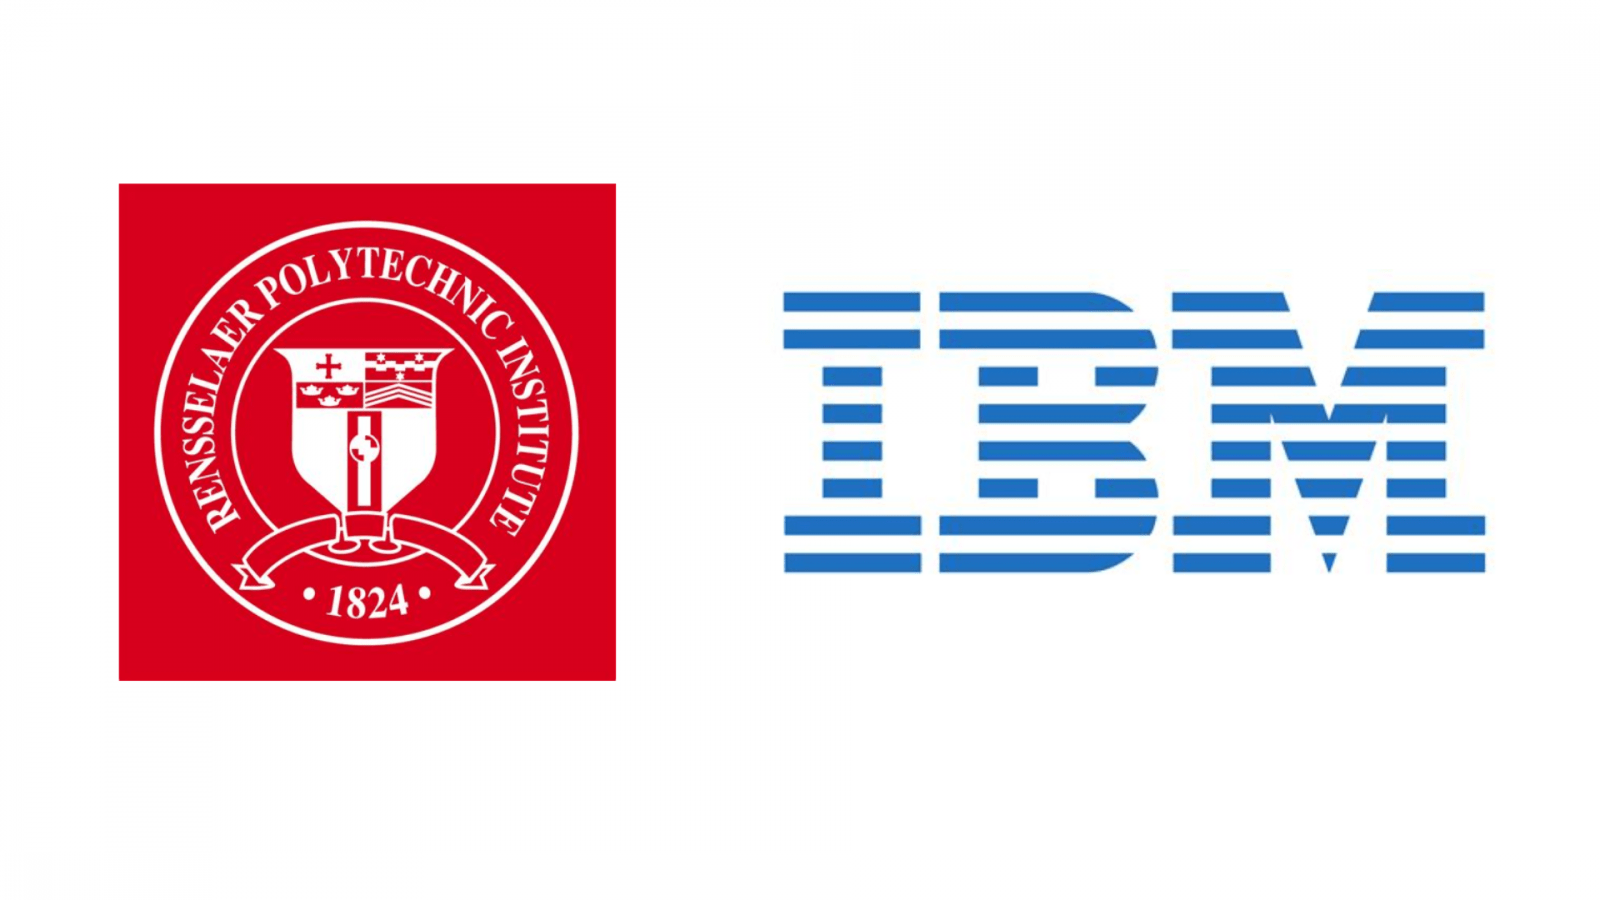 Rensselaer Polytechnic Institute (RPI) and IBM unveil the world’s first IBM Quantum System One on a university campus